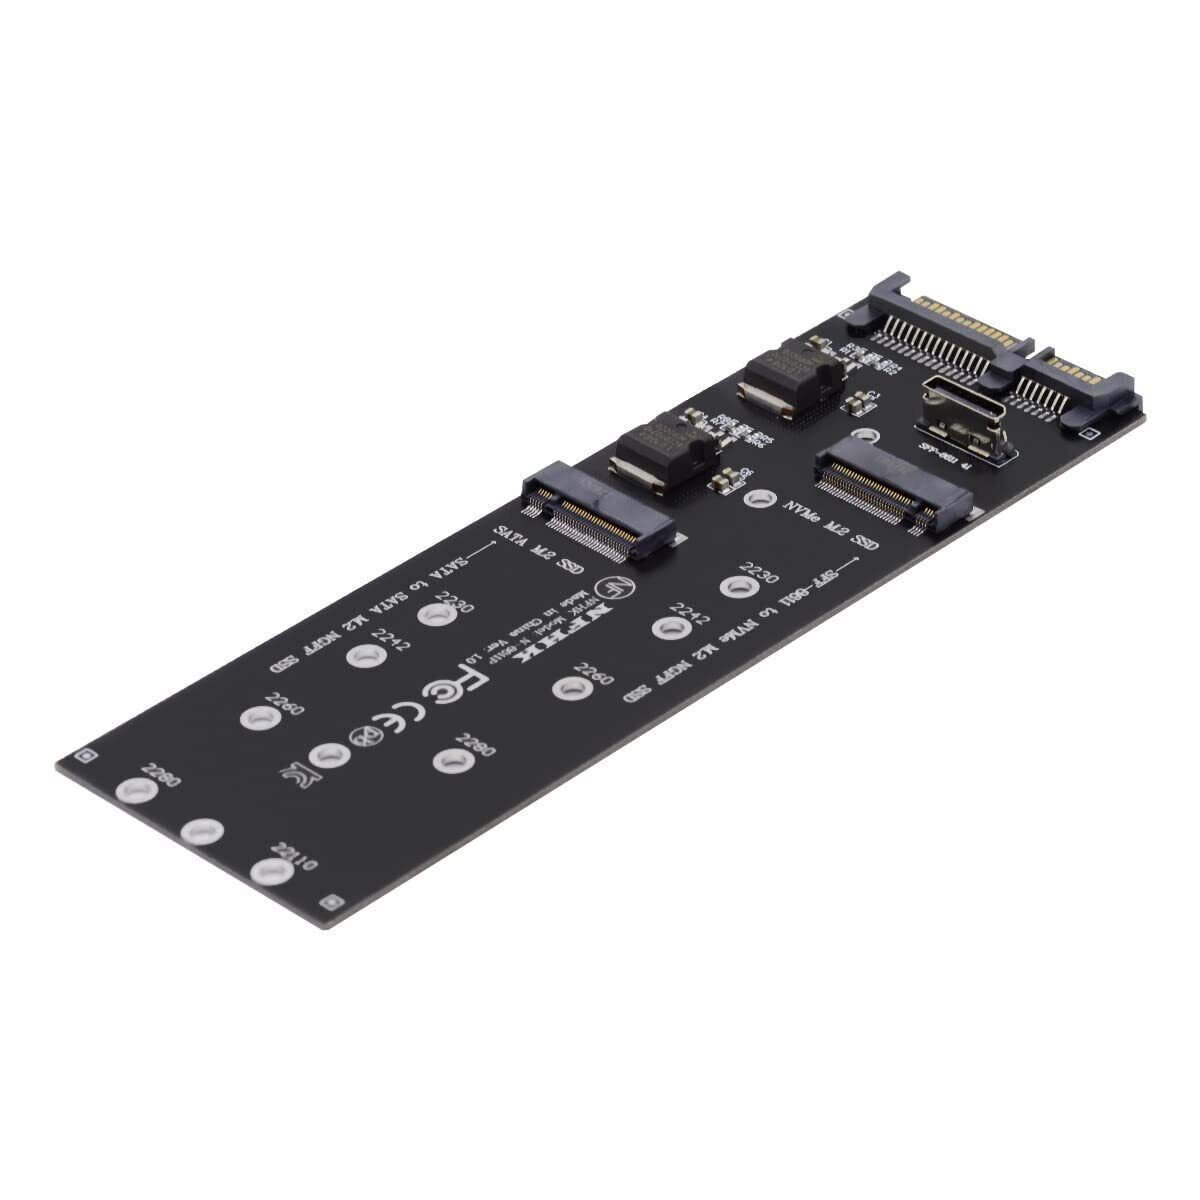 Cablecc Oculink SFF-8612 8611 to U.2 Kit M-Key to NVME PCIe SSD and NGFF to S...